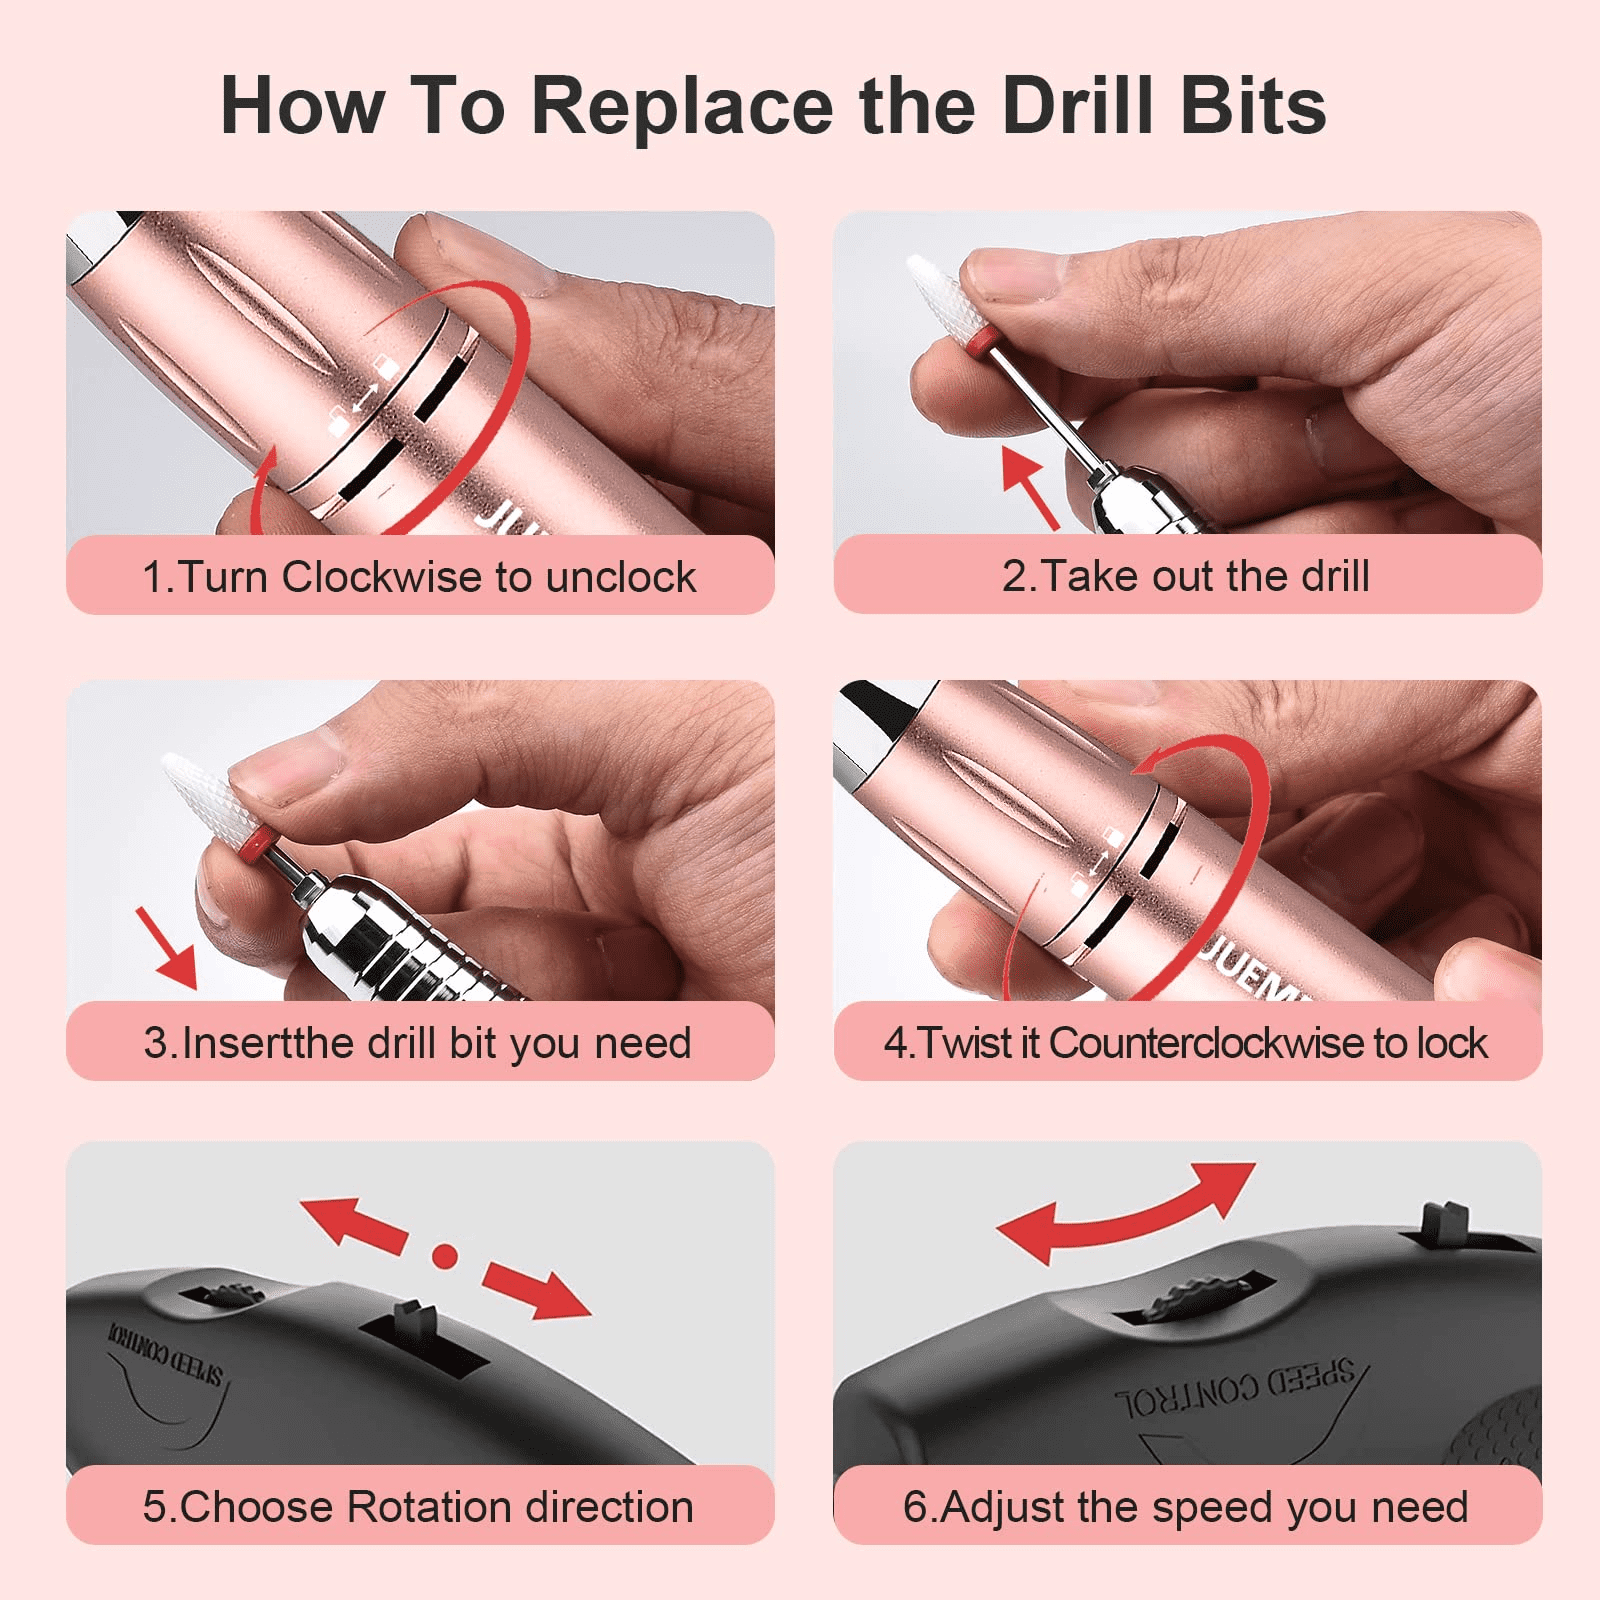 Portable Electric Nail Drill,Cordless Electric Nail File Kit for Gel Nails  and Home Salon, Manicure Pedicure Polishing Shape Tools : Amazon.in: Beauty